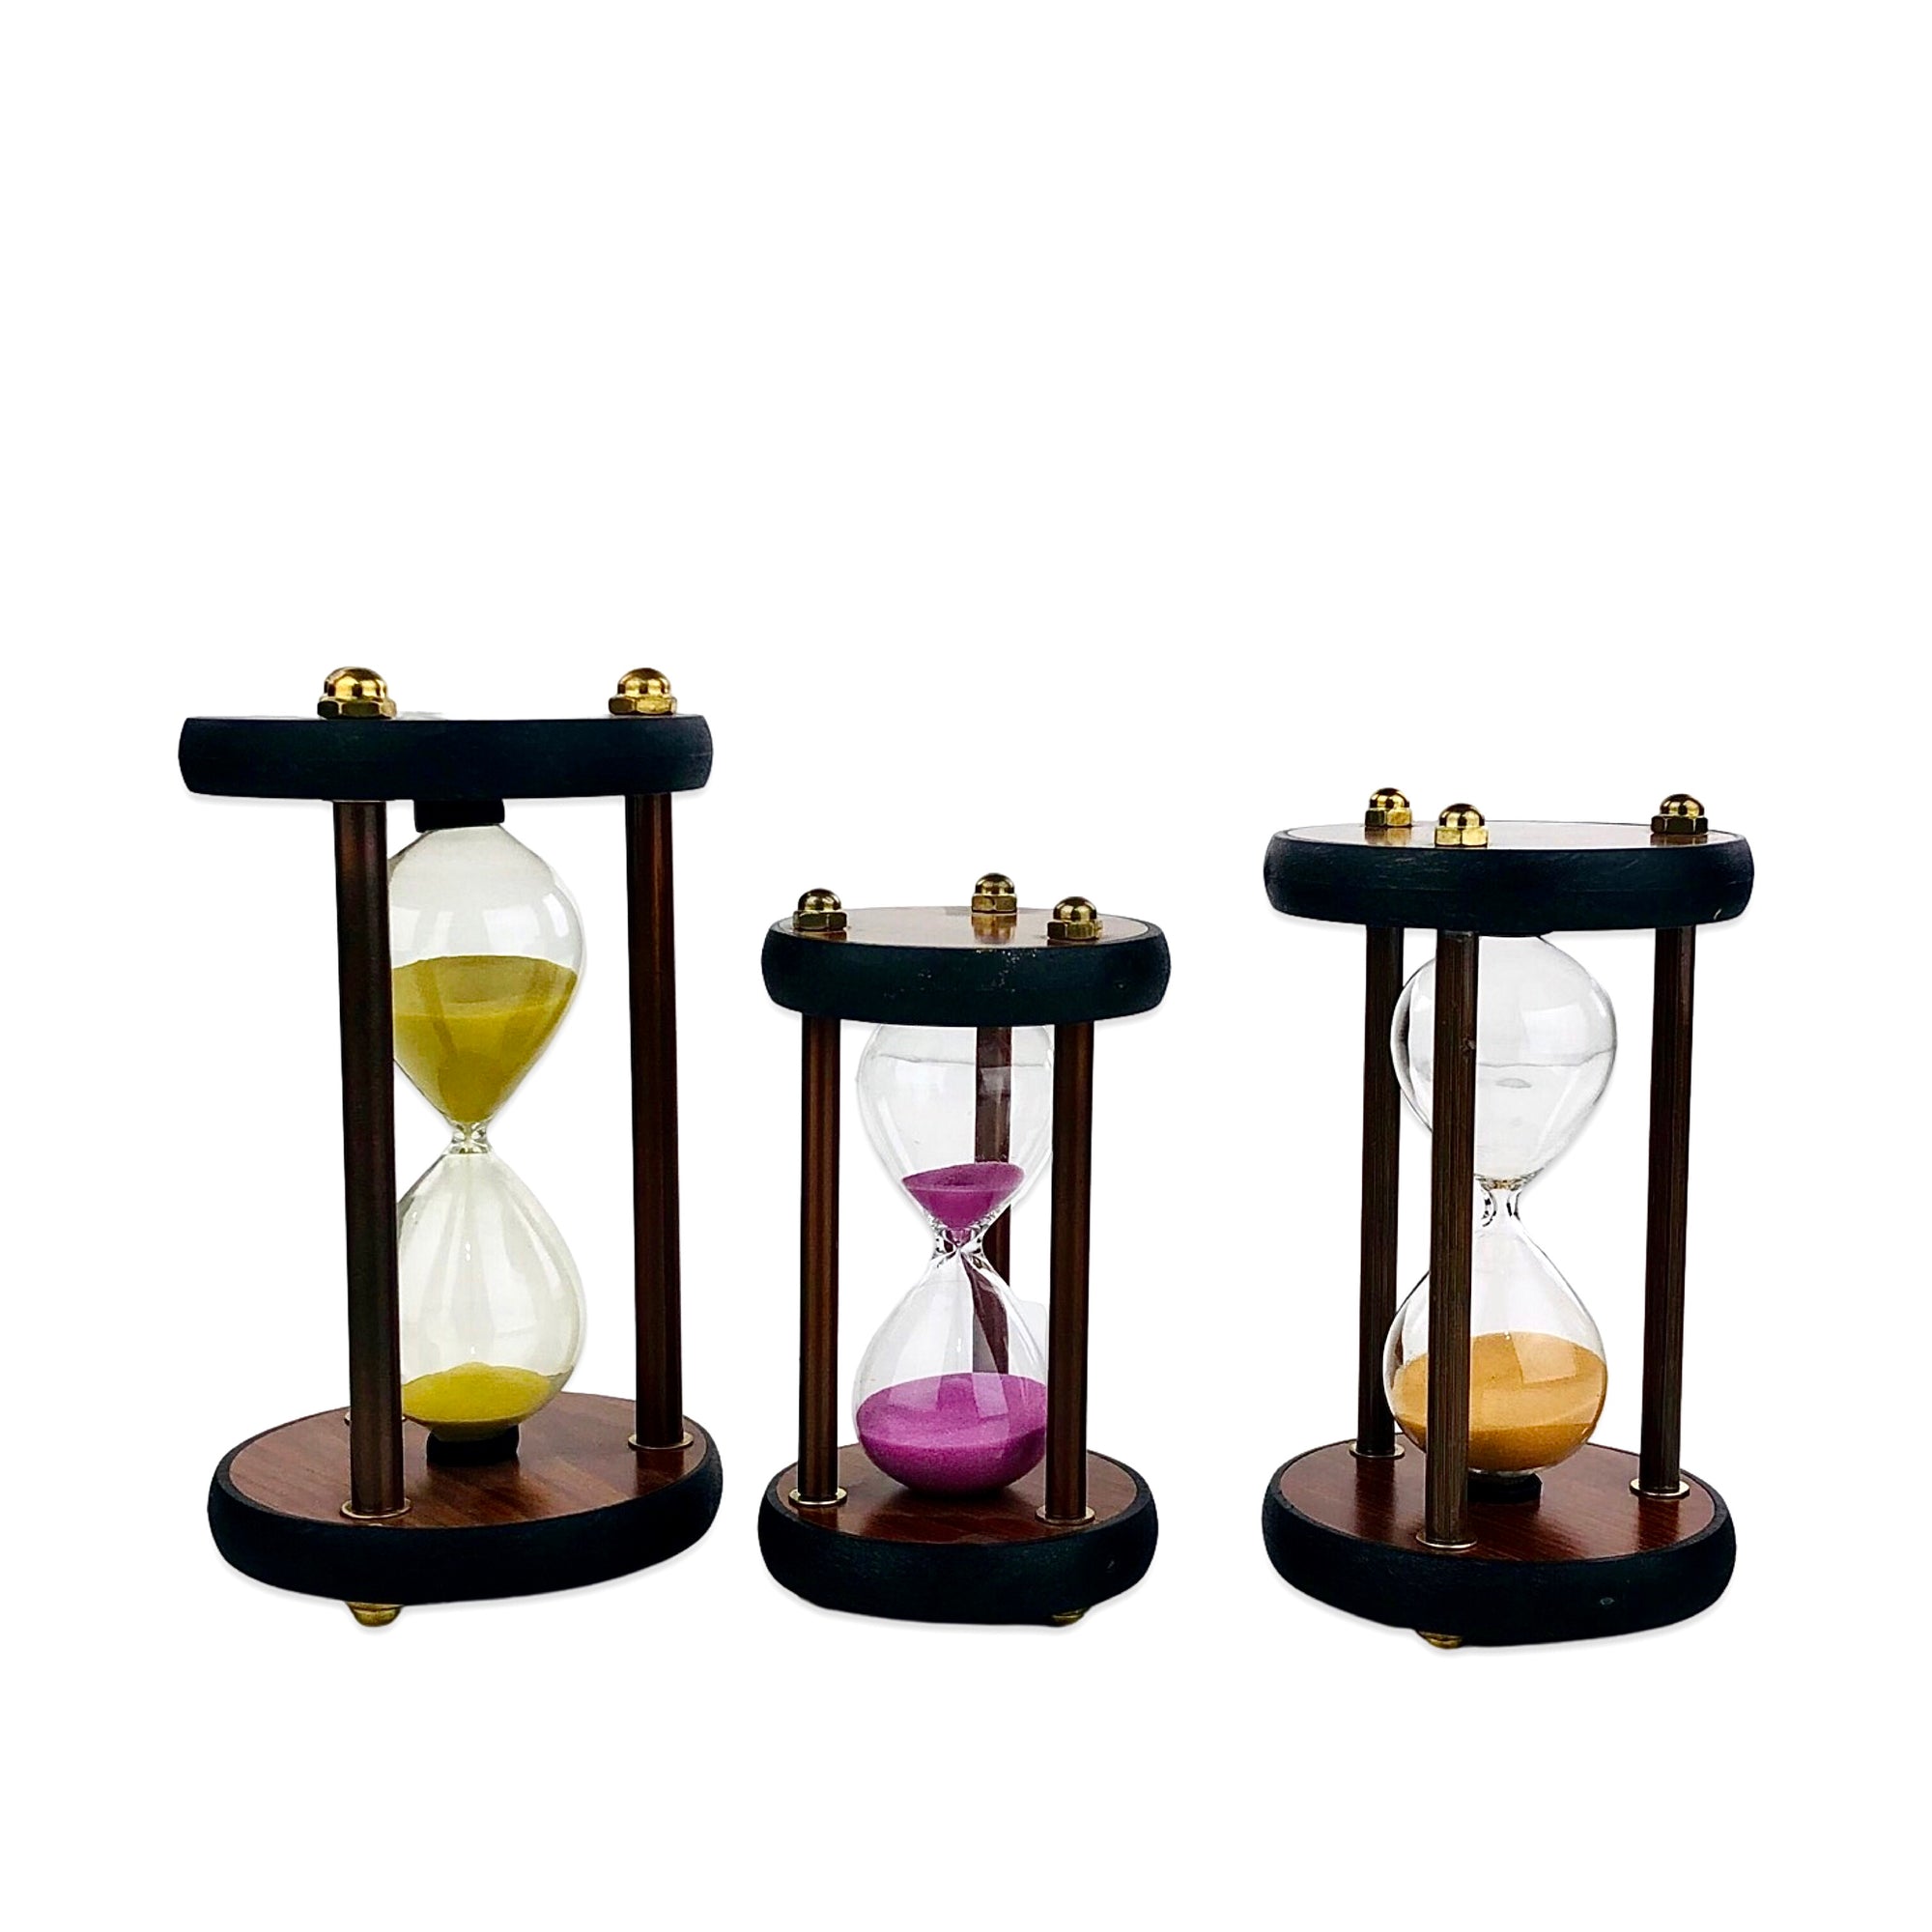 Round Wooden Hours Glass with Colorful Sand